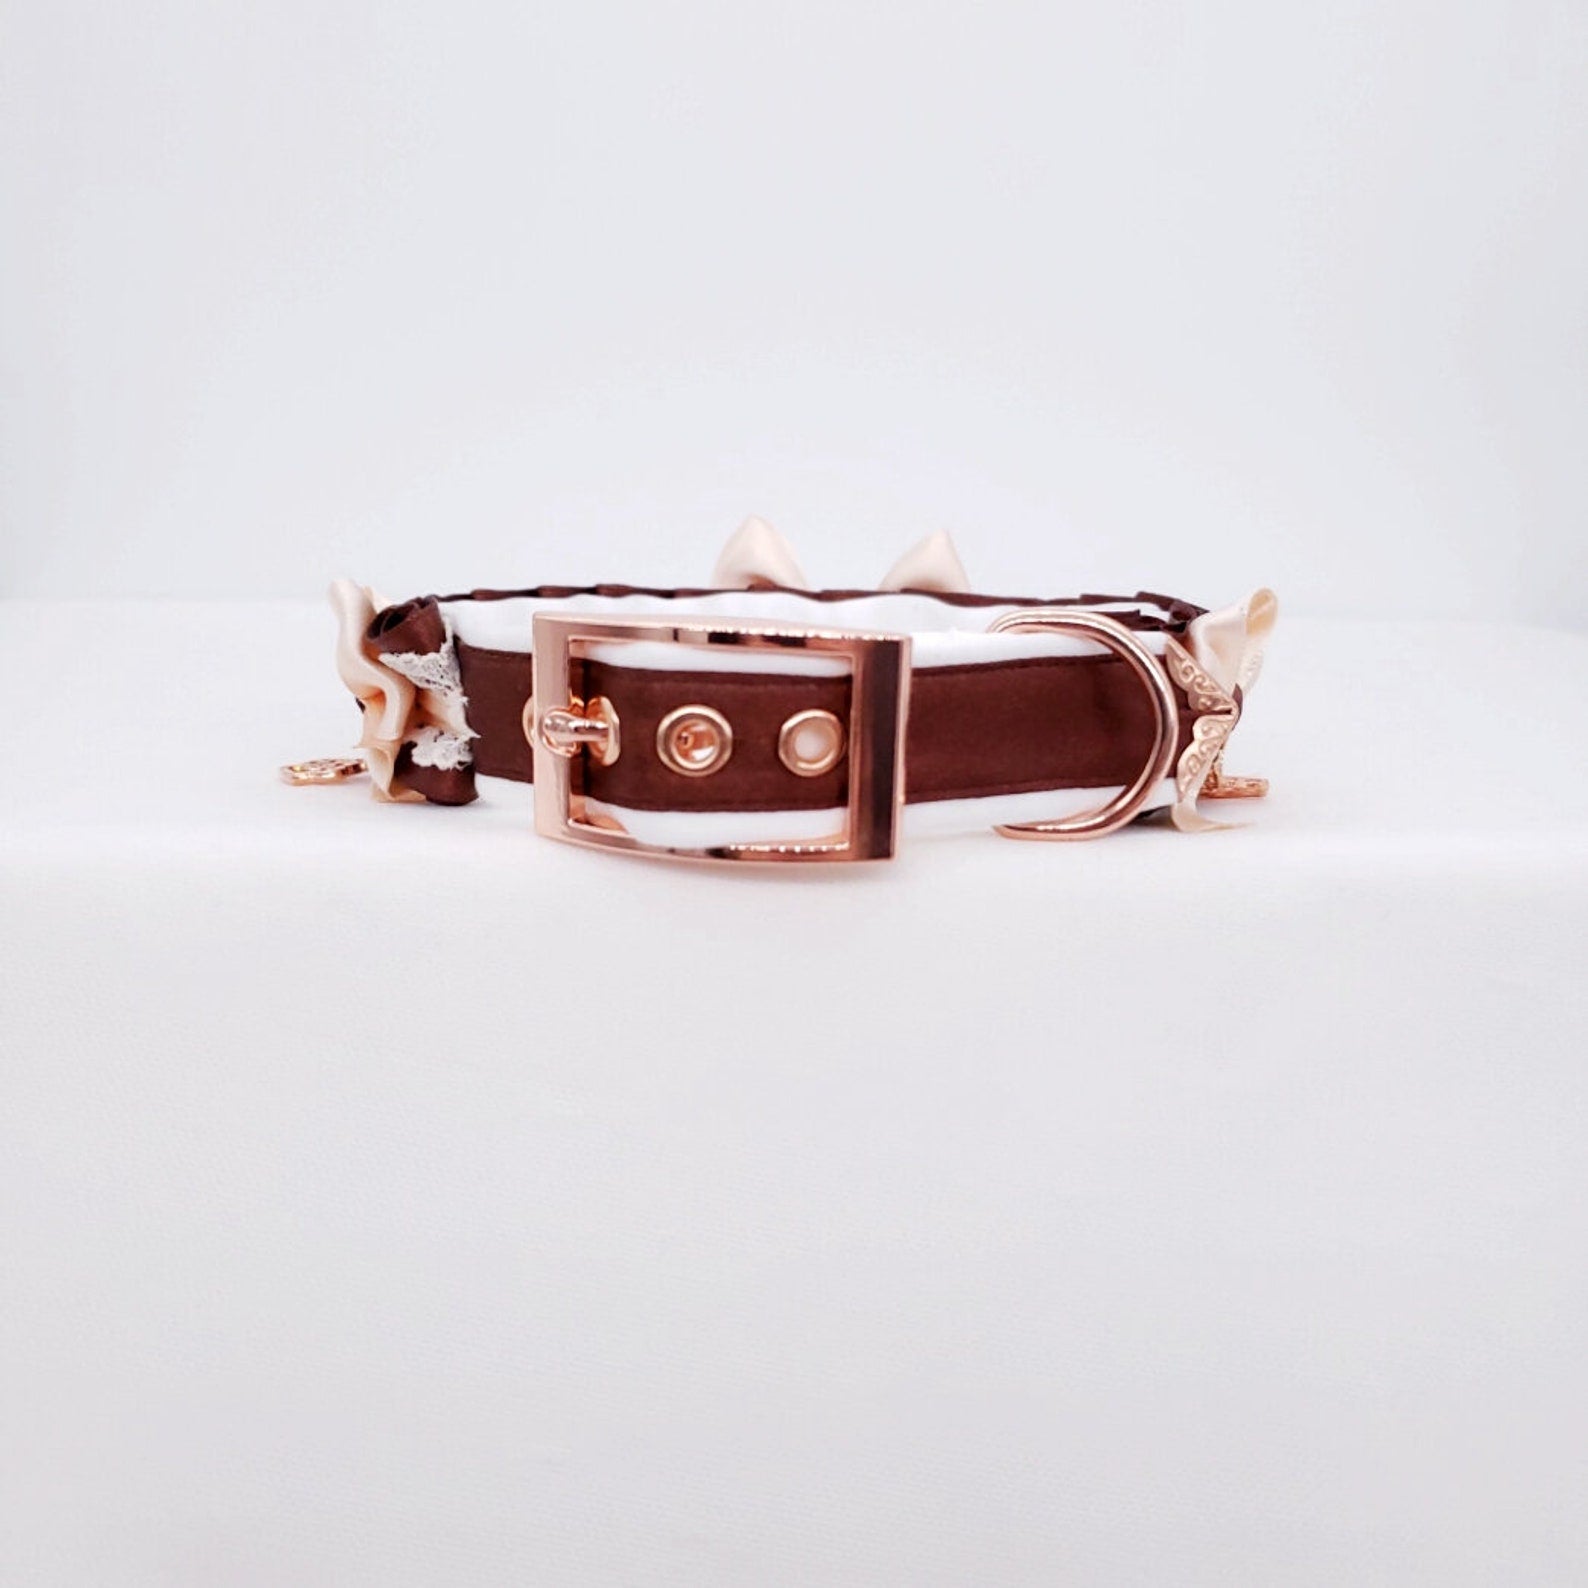 Chocolate, Cream and Rose Gold Puppy Pet Play Collar and Leash Set